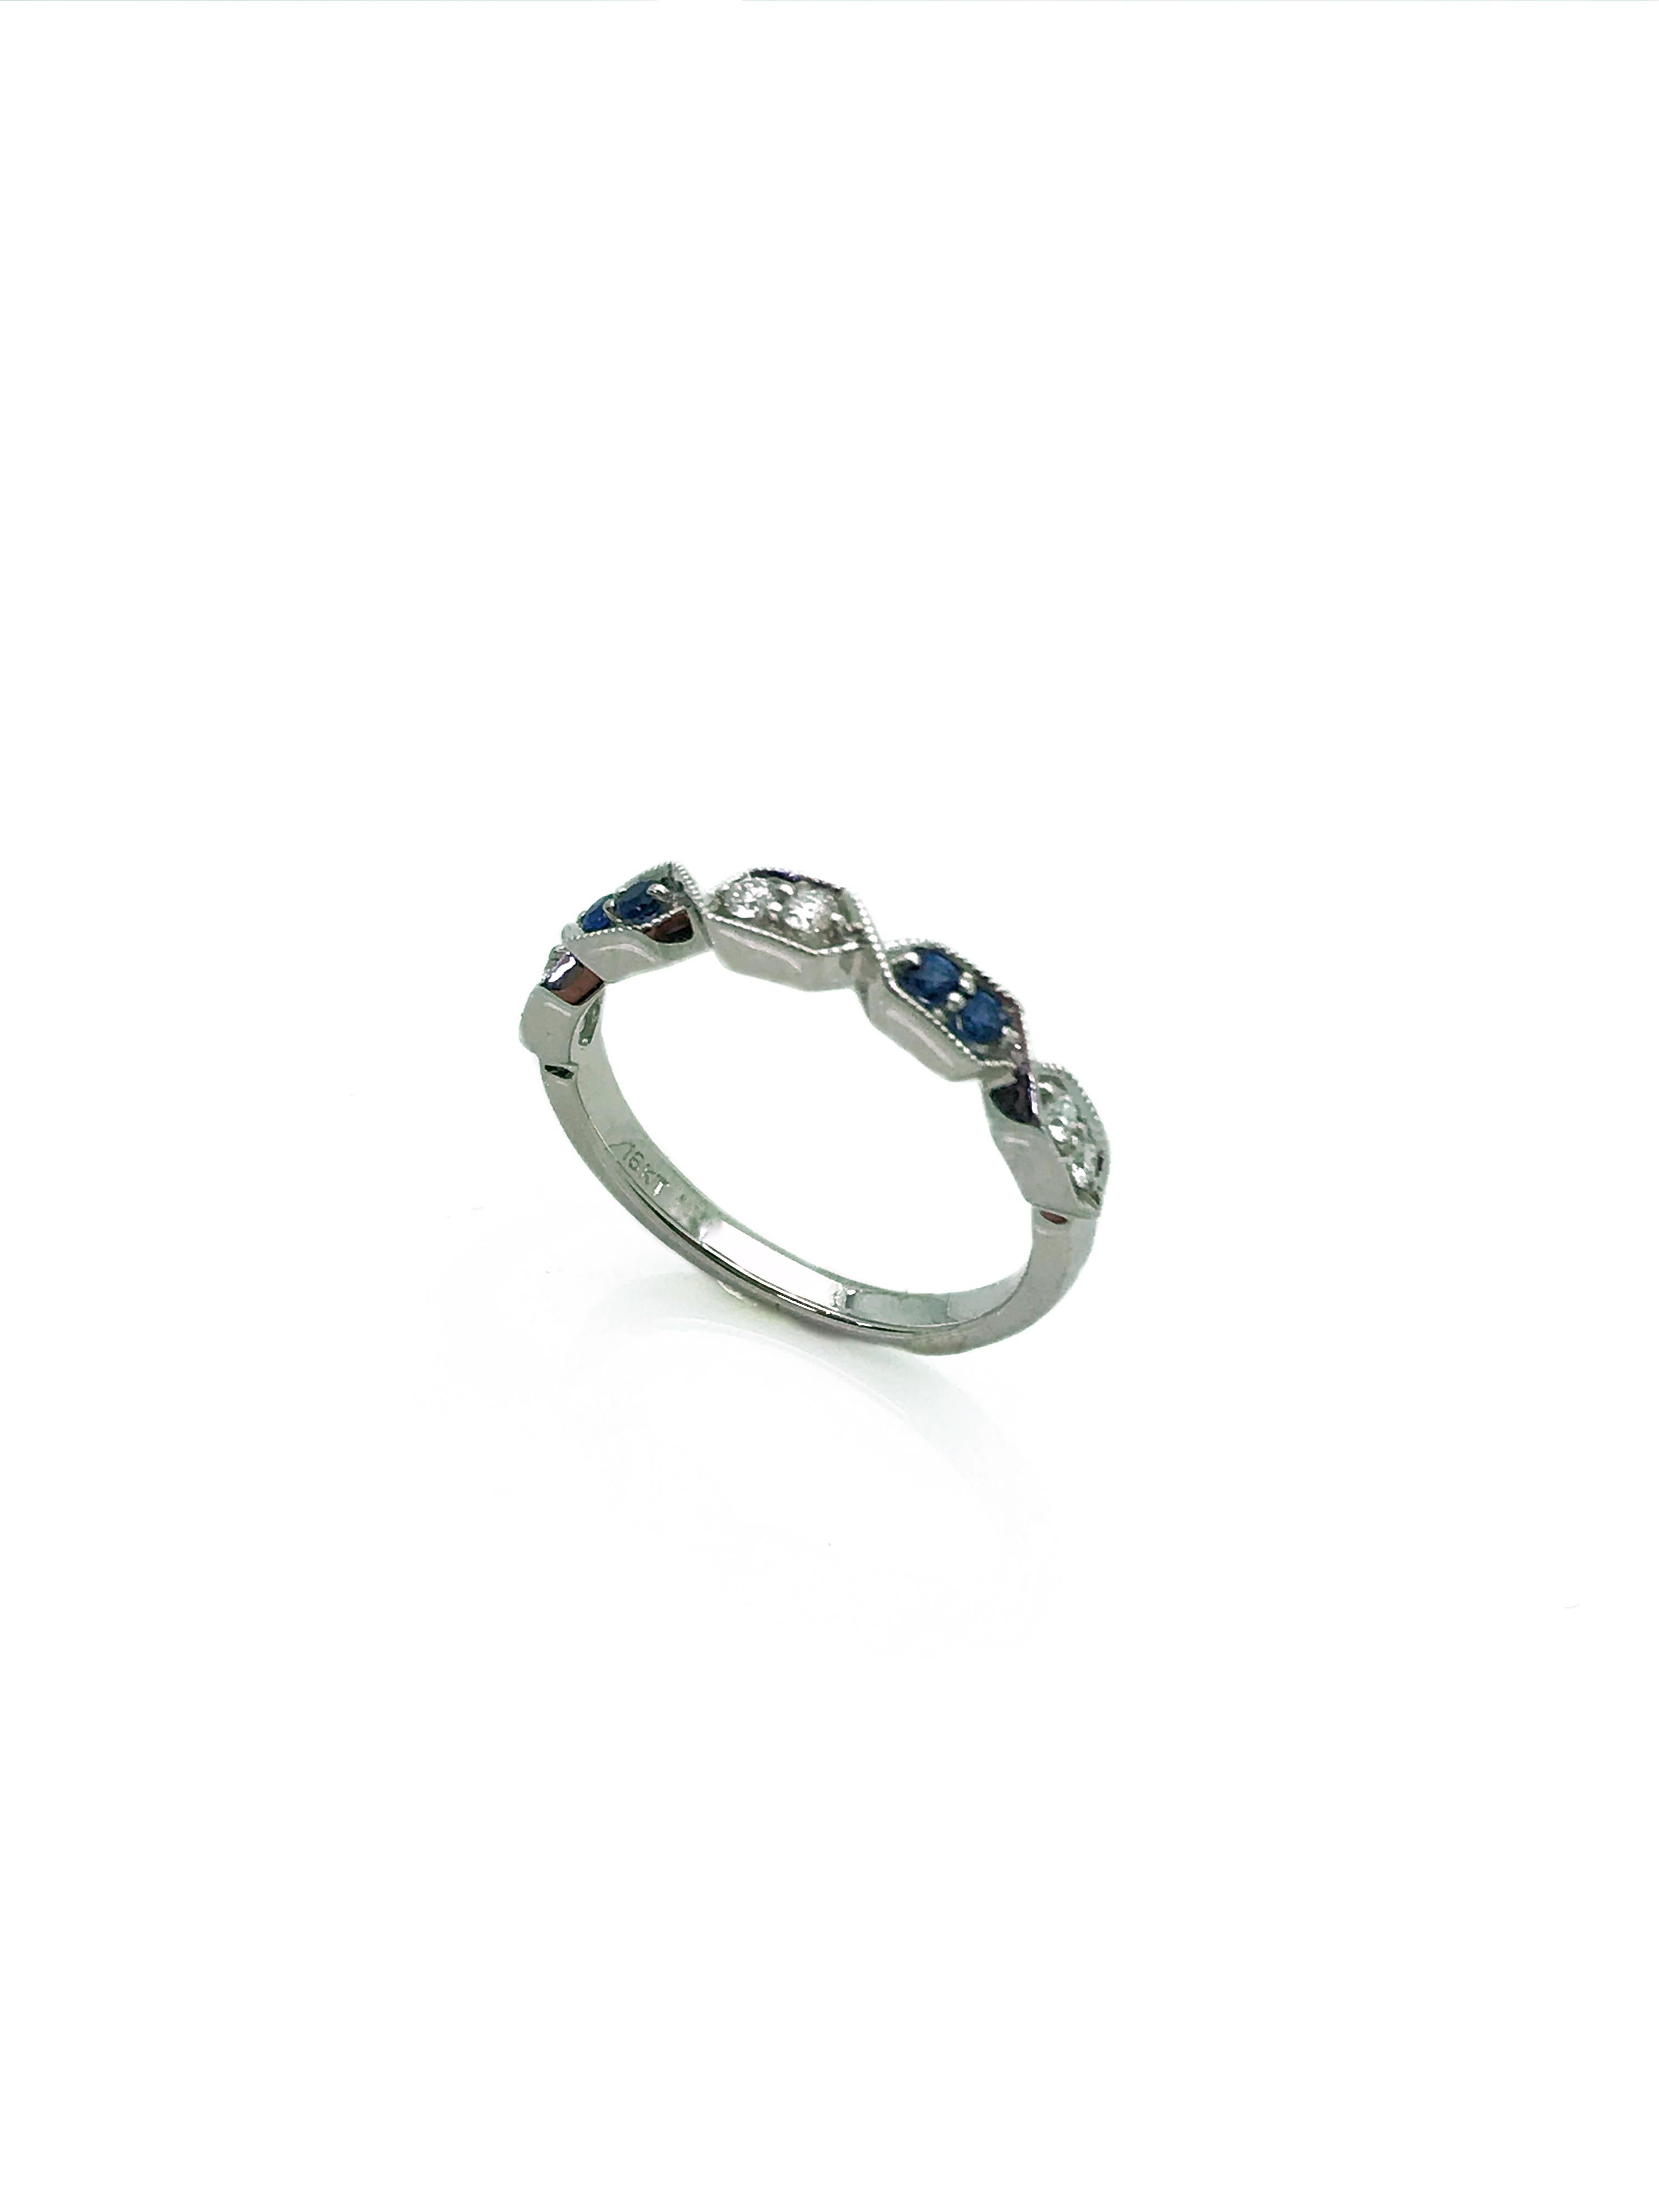 The sapphire and diamond band ring will compliment a solitaire ring or can be worn as a single ring for a minimalist look.

This is a one of a kind design. You will receive the ring in the pictures.

▸ ▸ ▸ Details ◂ ◂ ◂

Sapphire Weight: